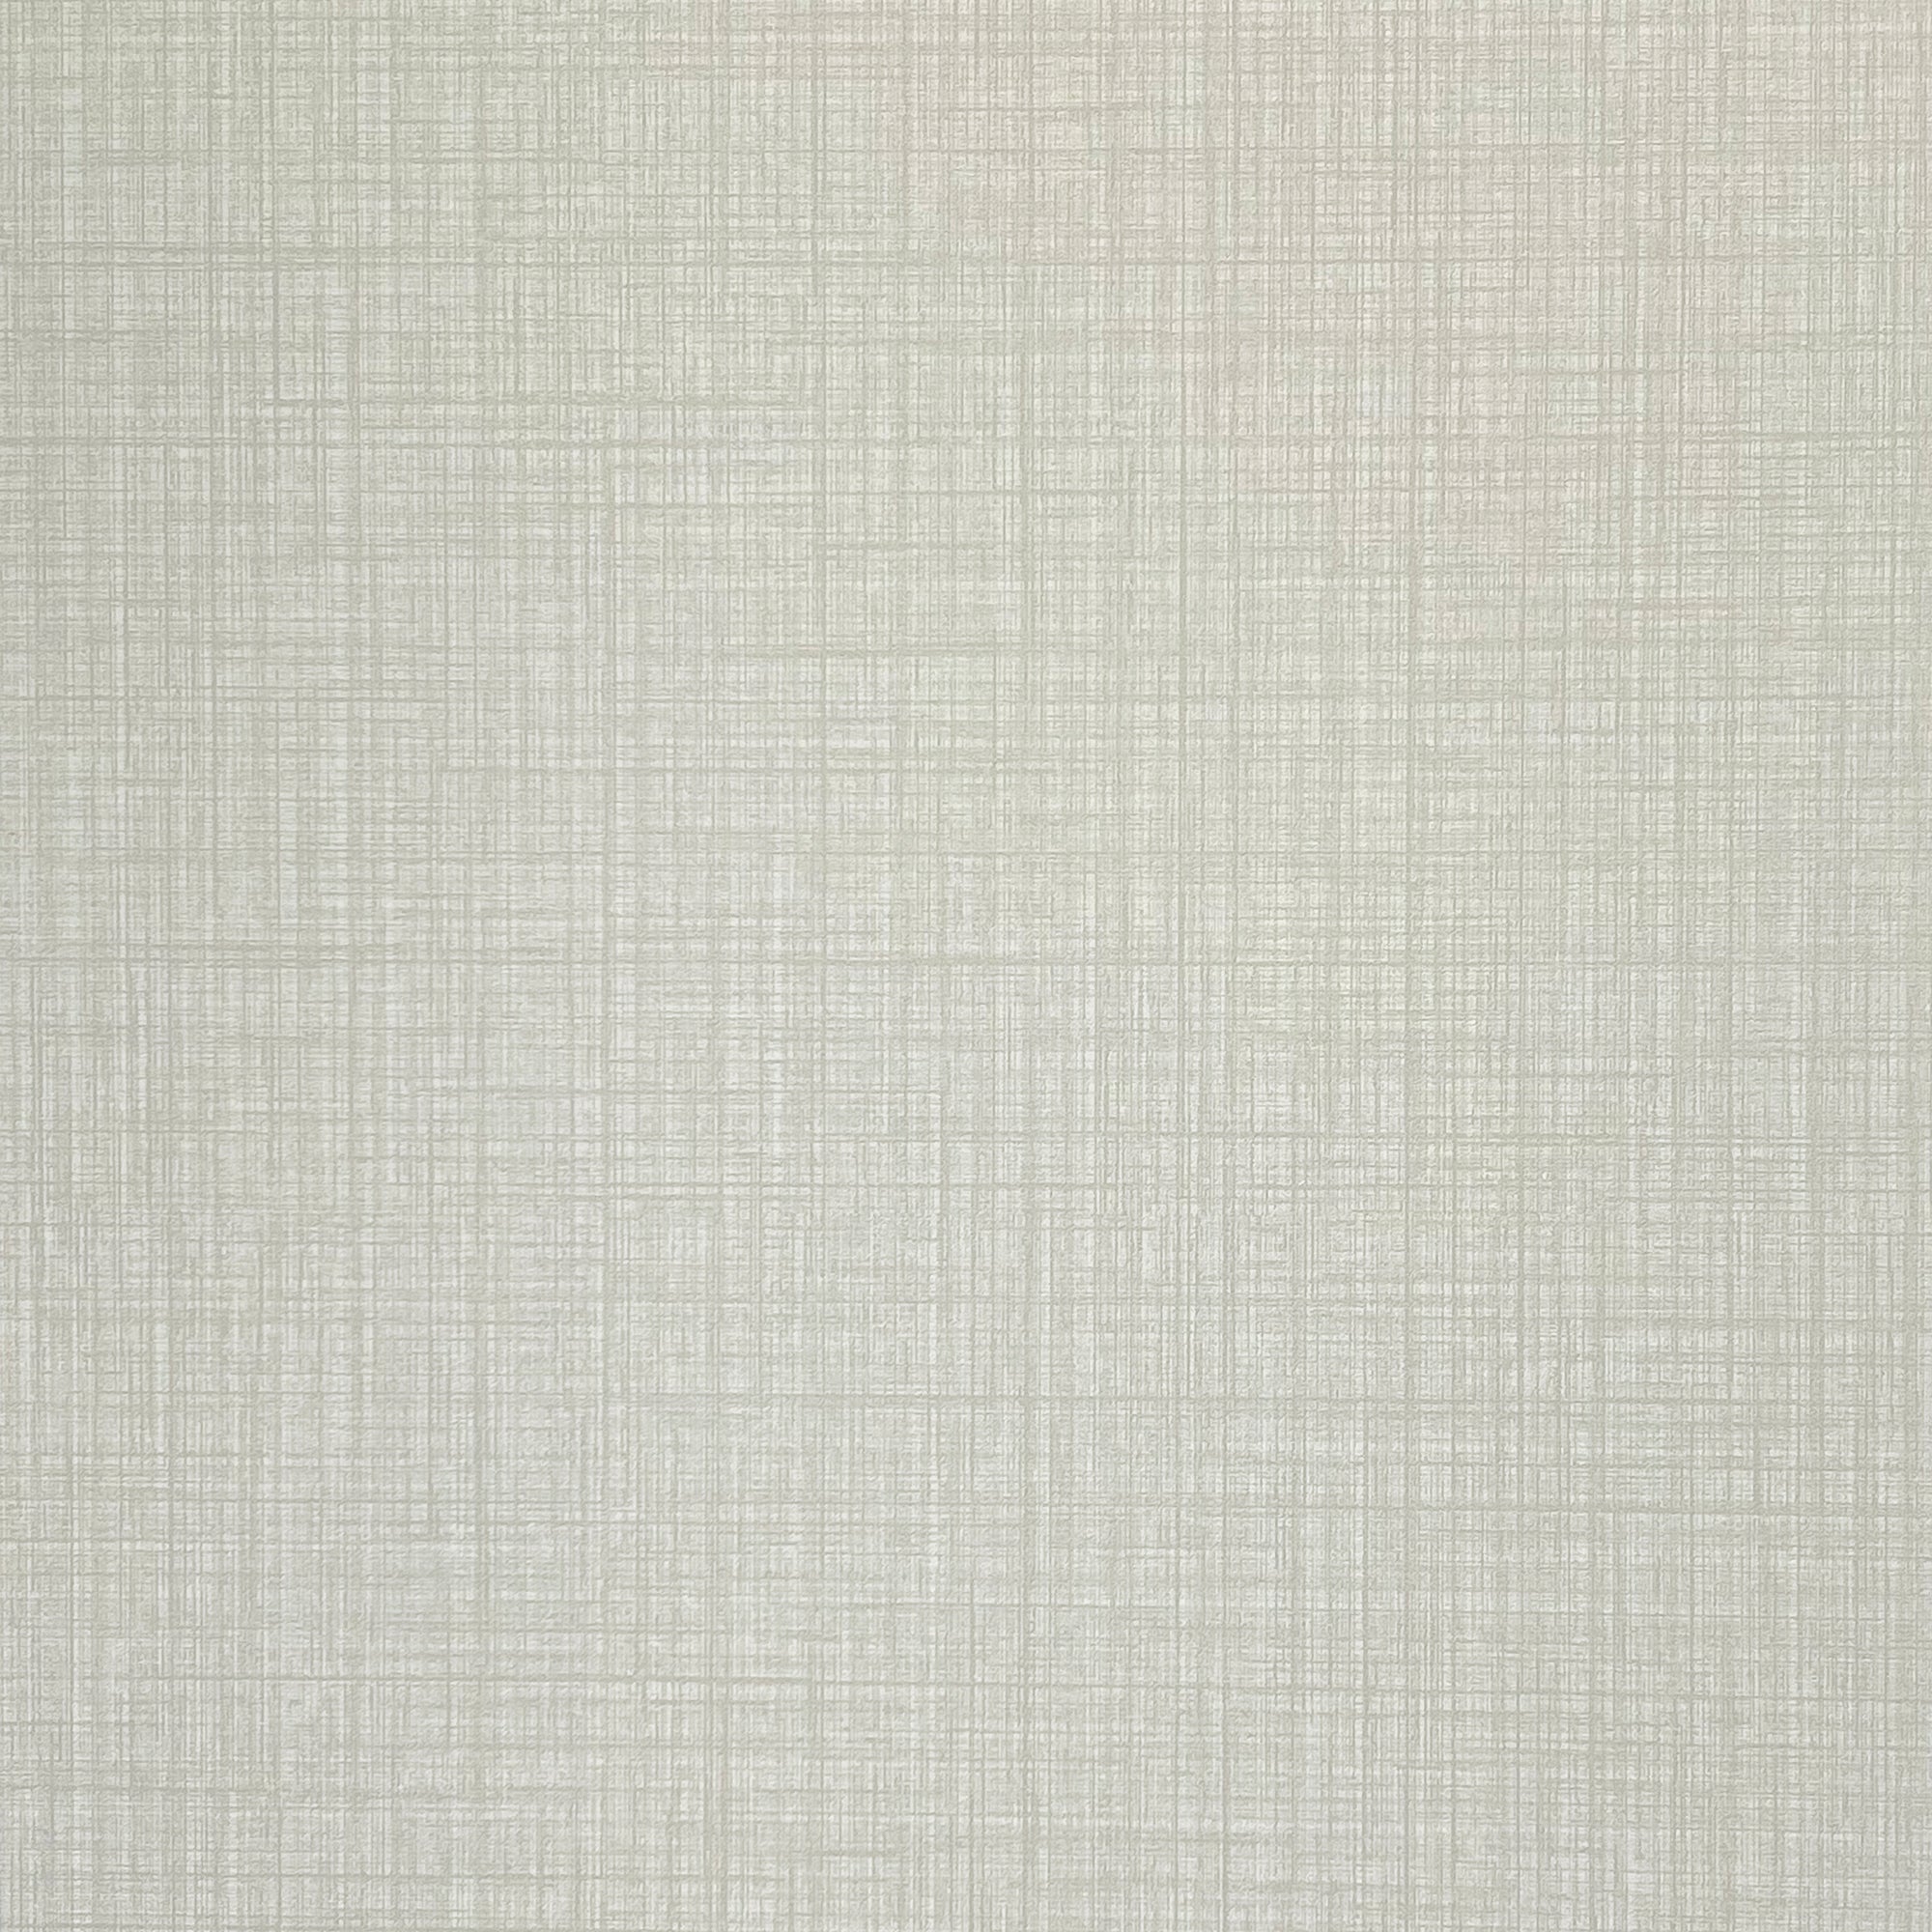 Weave Texture Neutral sw12 by Arthouse